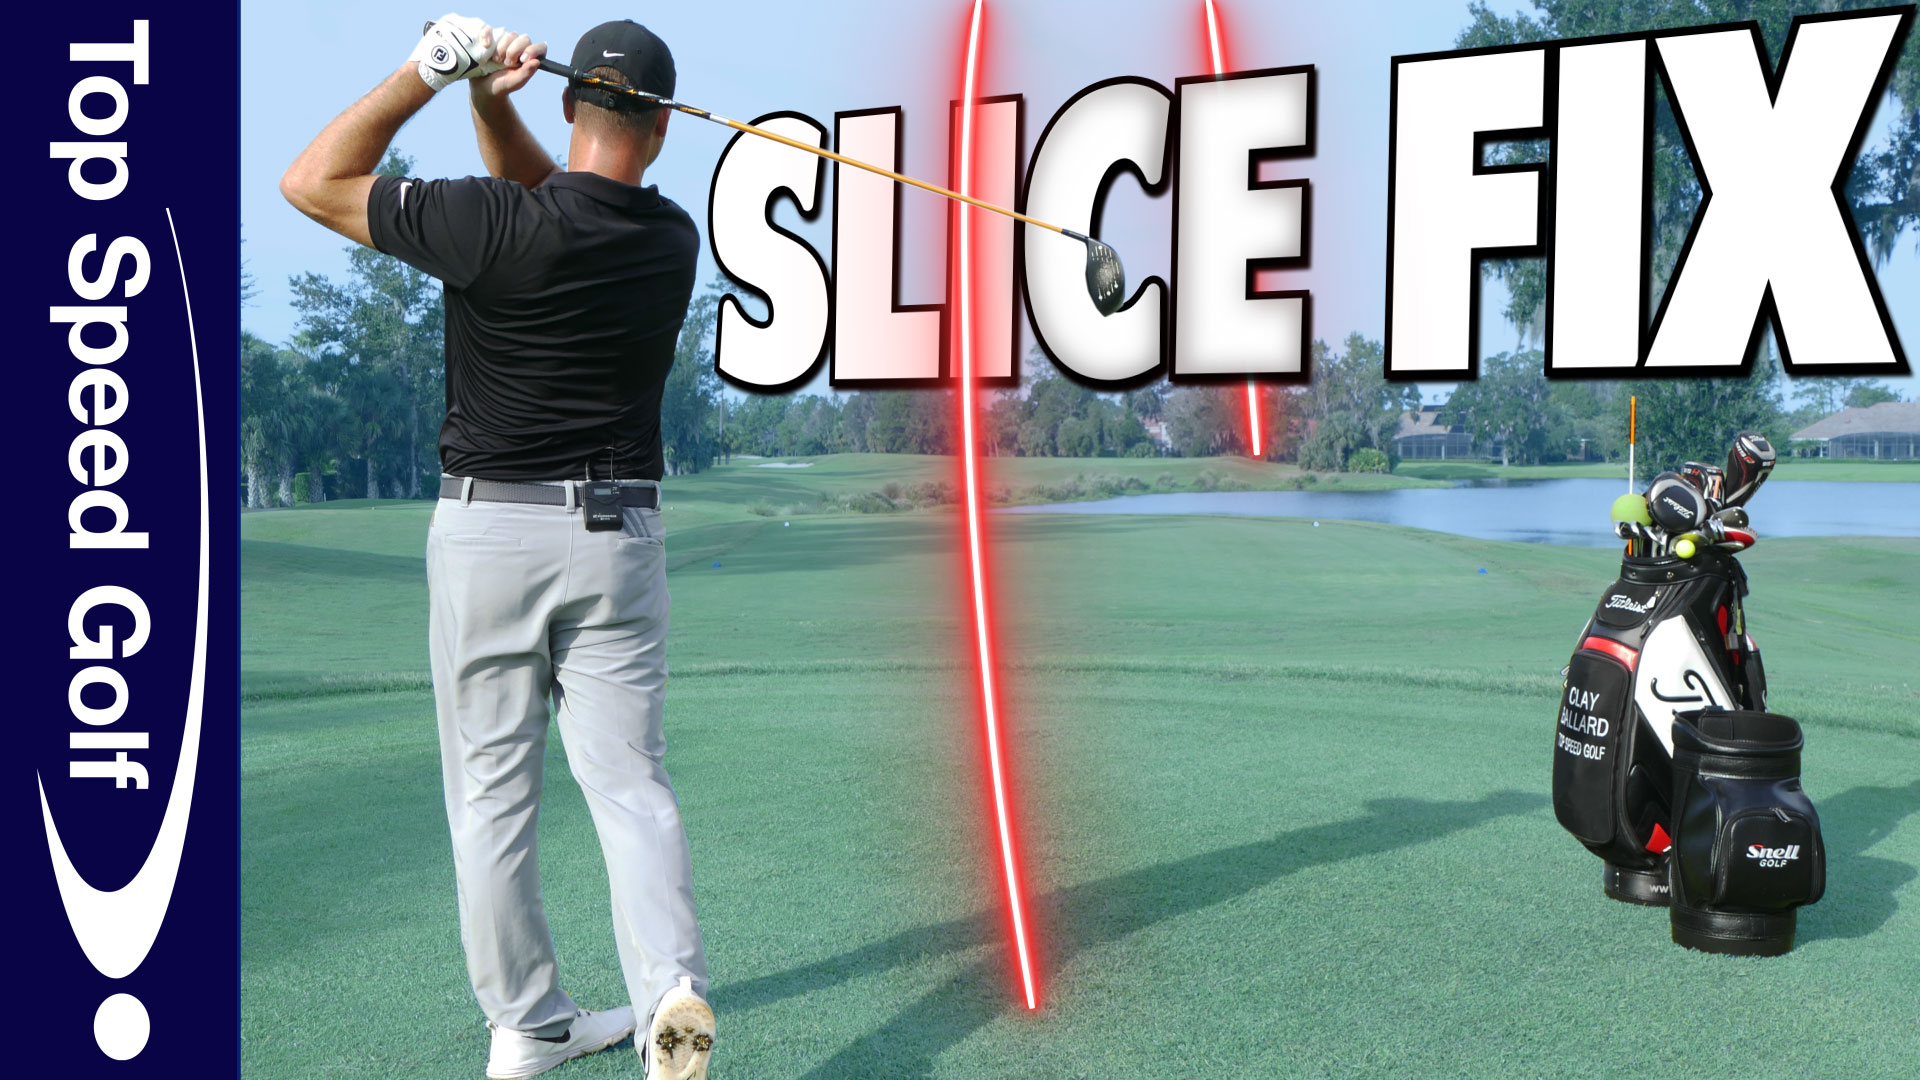 10 Ways to Stop Slicing and Fix a Golf Slice for Good - The Left Rough